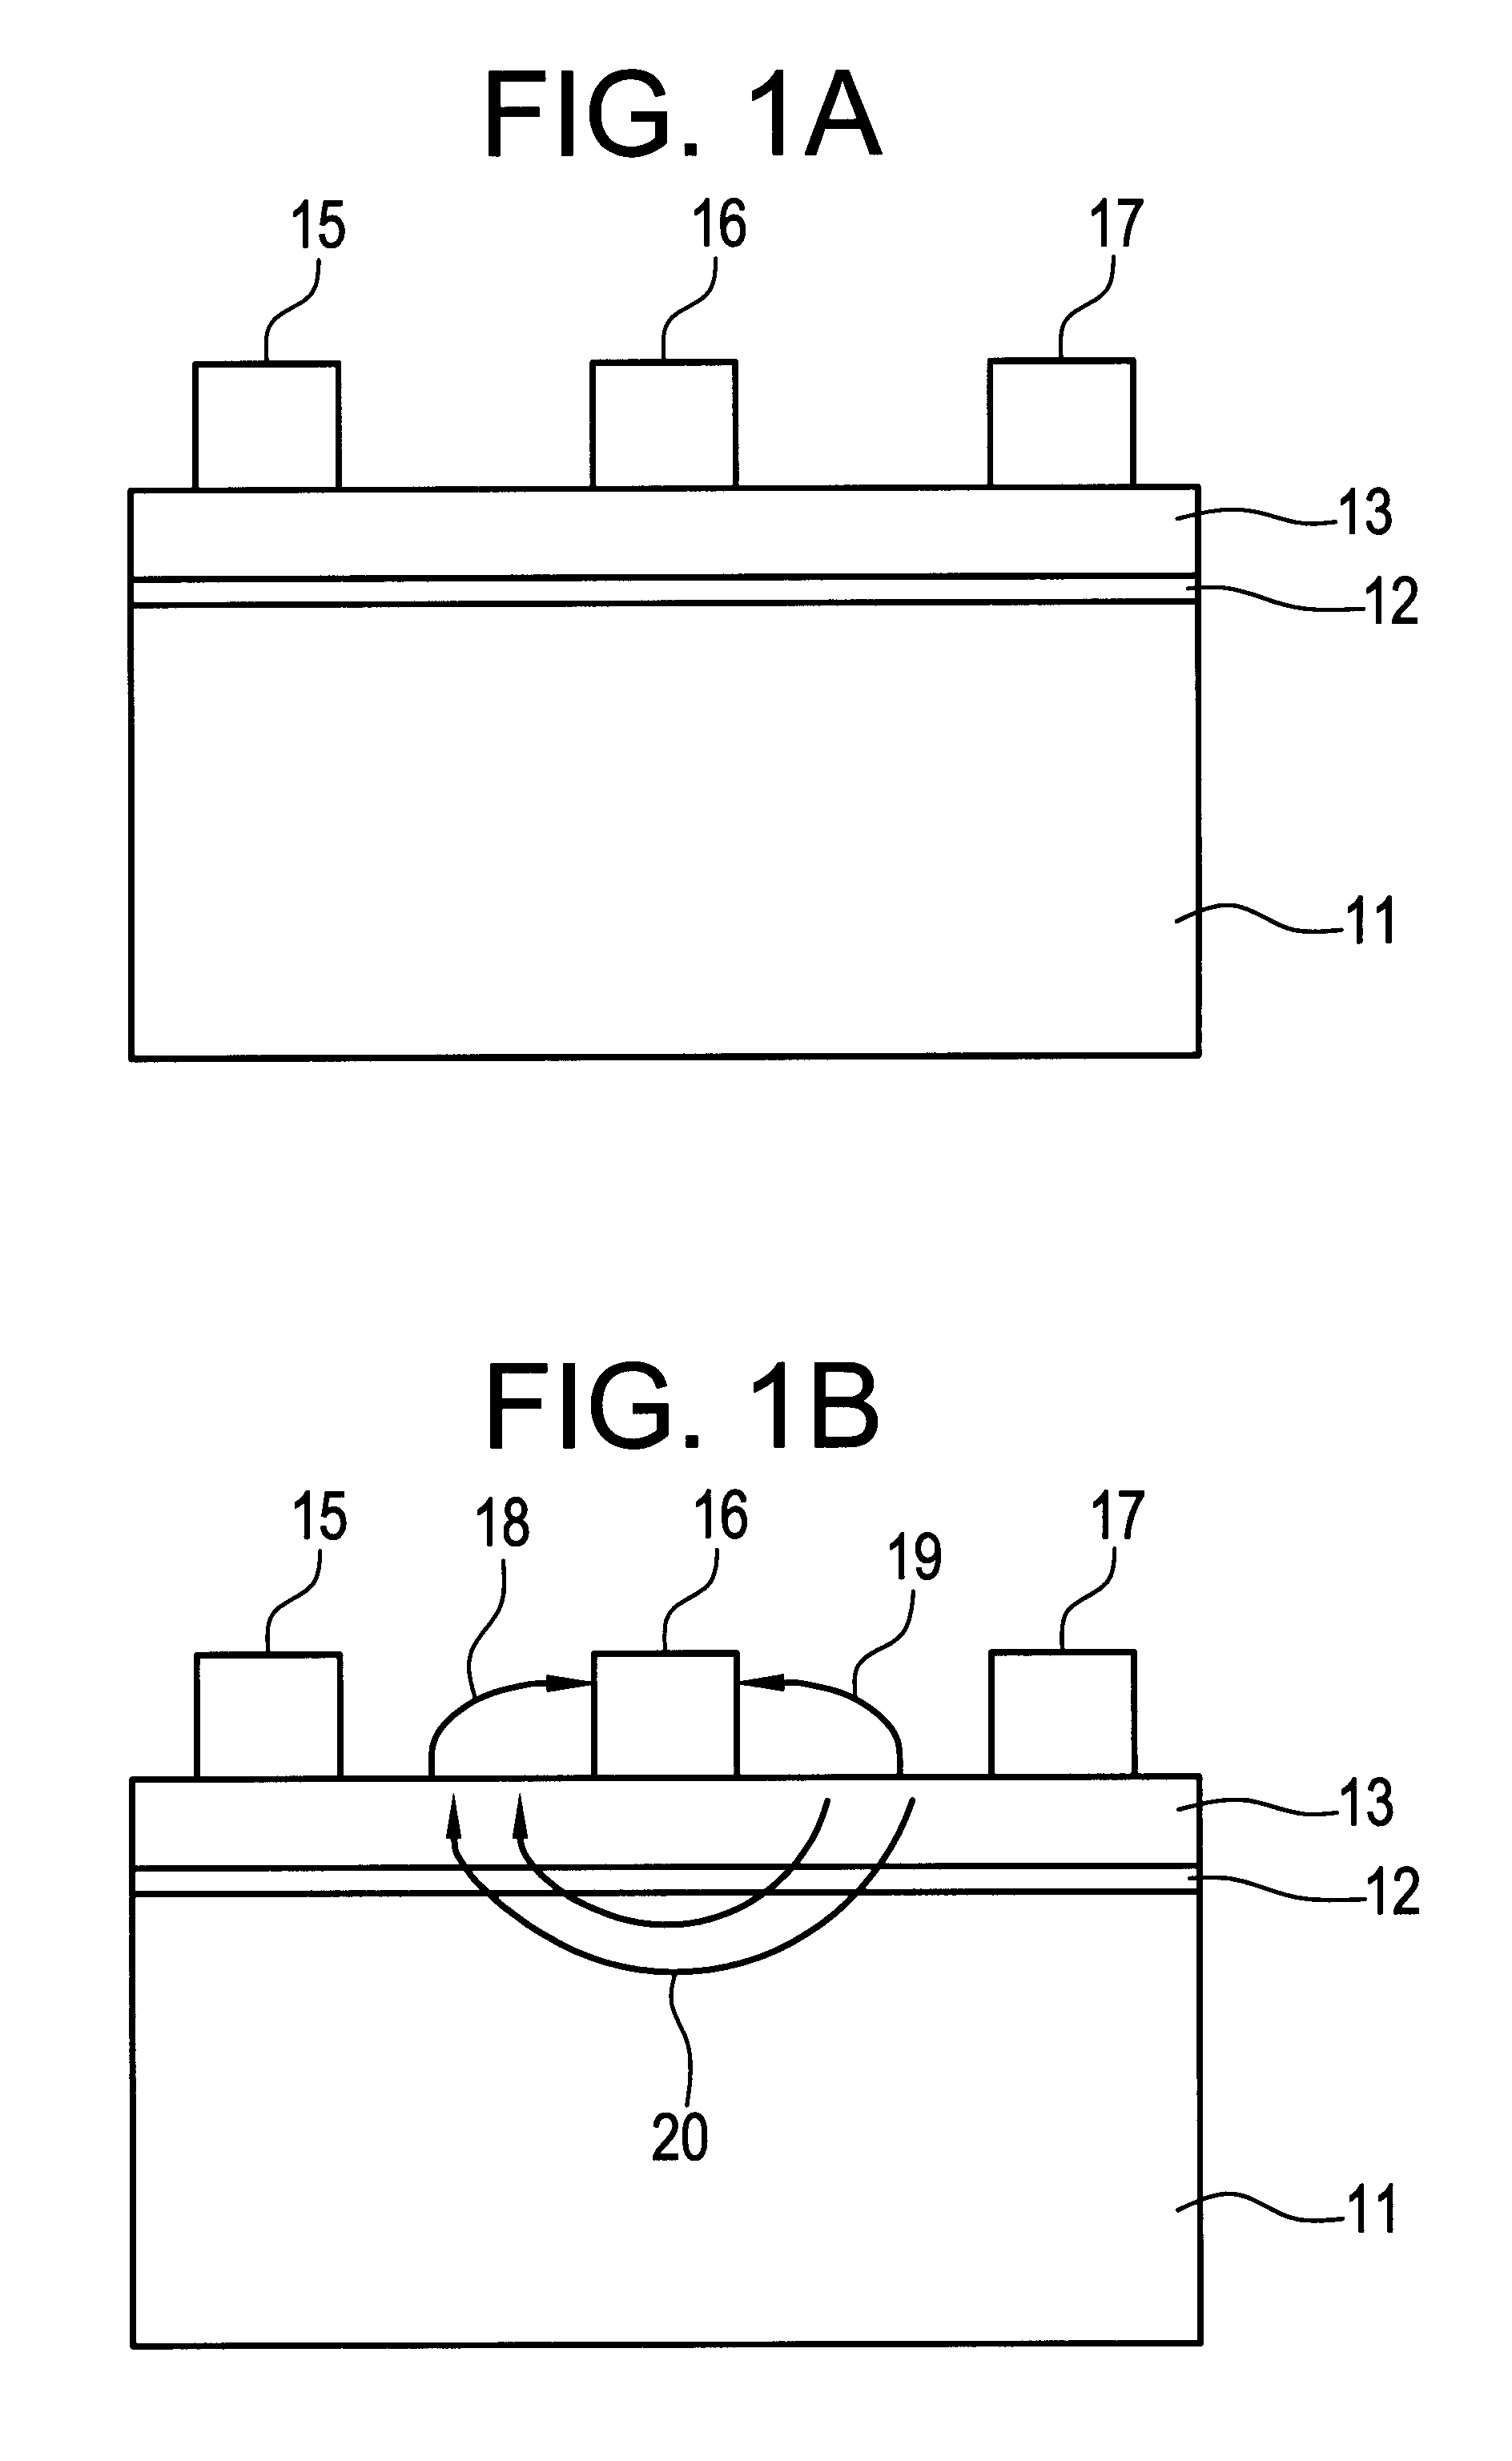 Semiconductor device having drain and gate electrodes formed to lie along few degrees of direction in relation to the substrate